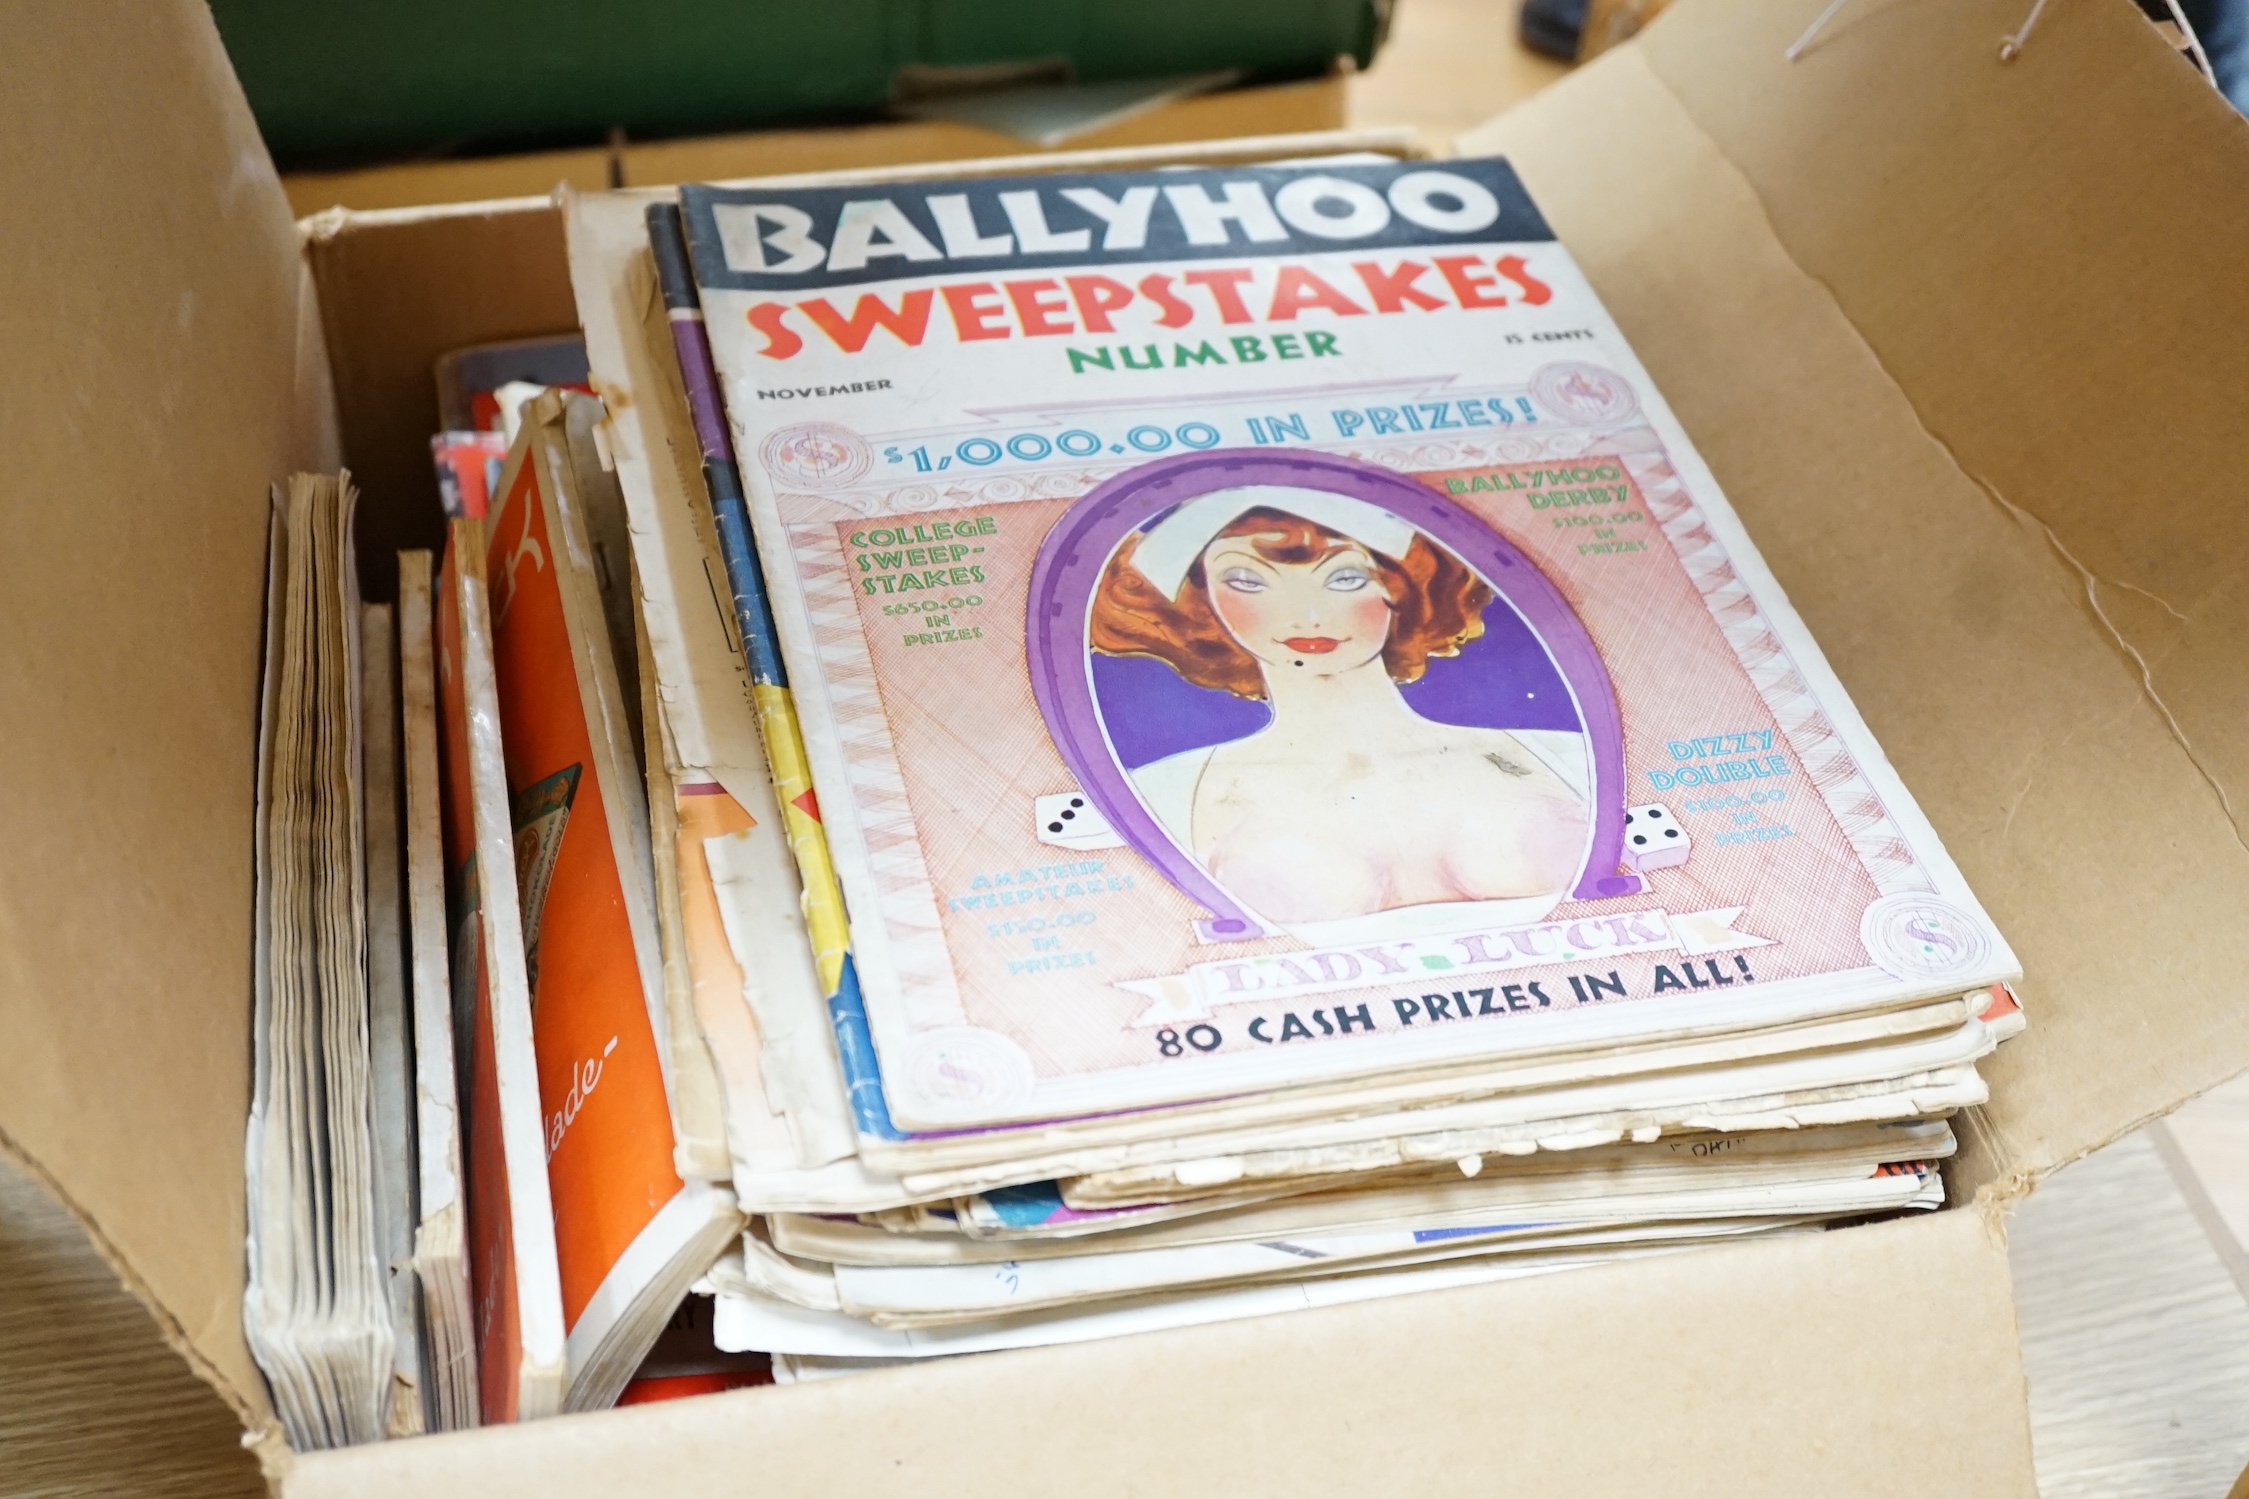 Journals and Magazines (British and American), include The Bystander (11 issues, 1920's/30's); Life (II, mostly 1960's); Ballyhoo (15, 1930's); and some miscellaneous others, original wrappers, approx. 60)